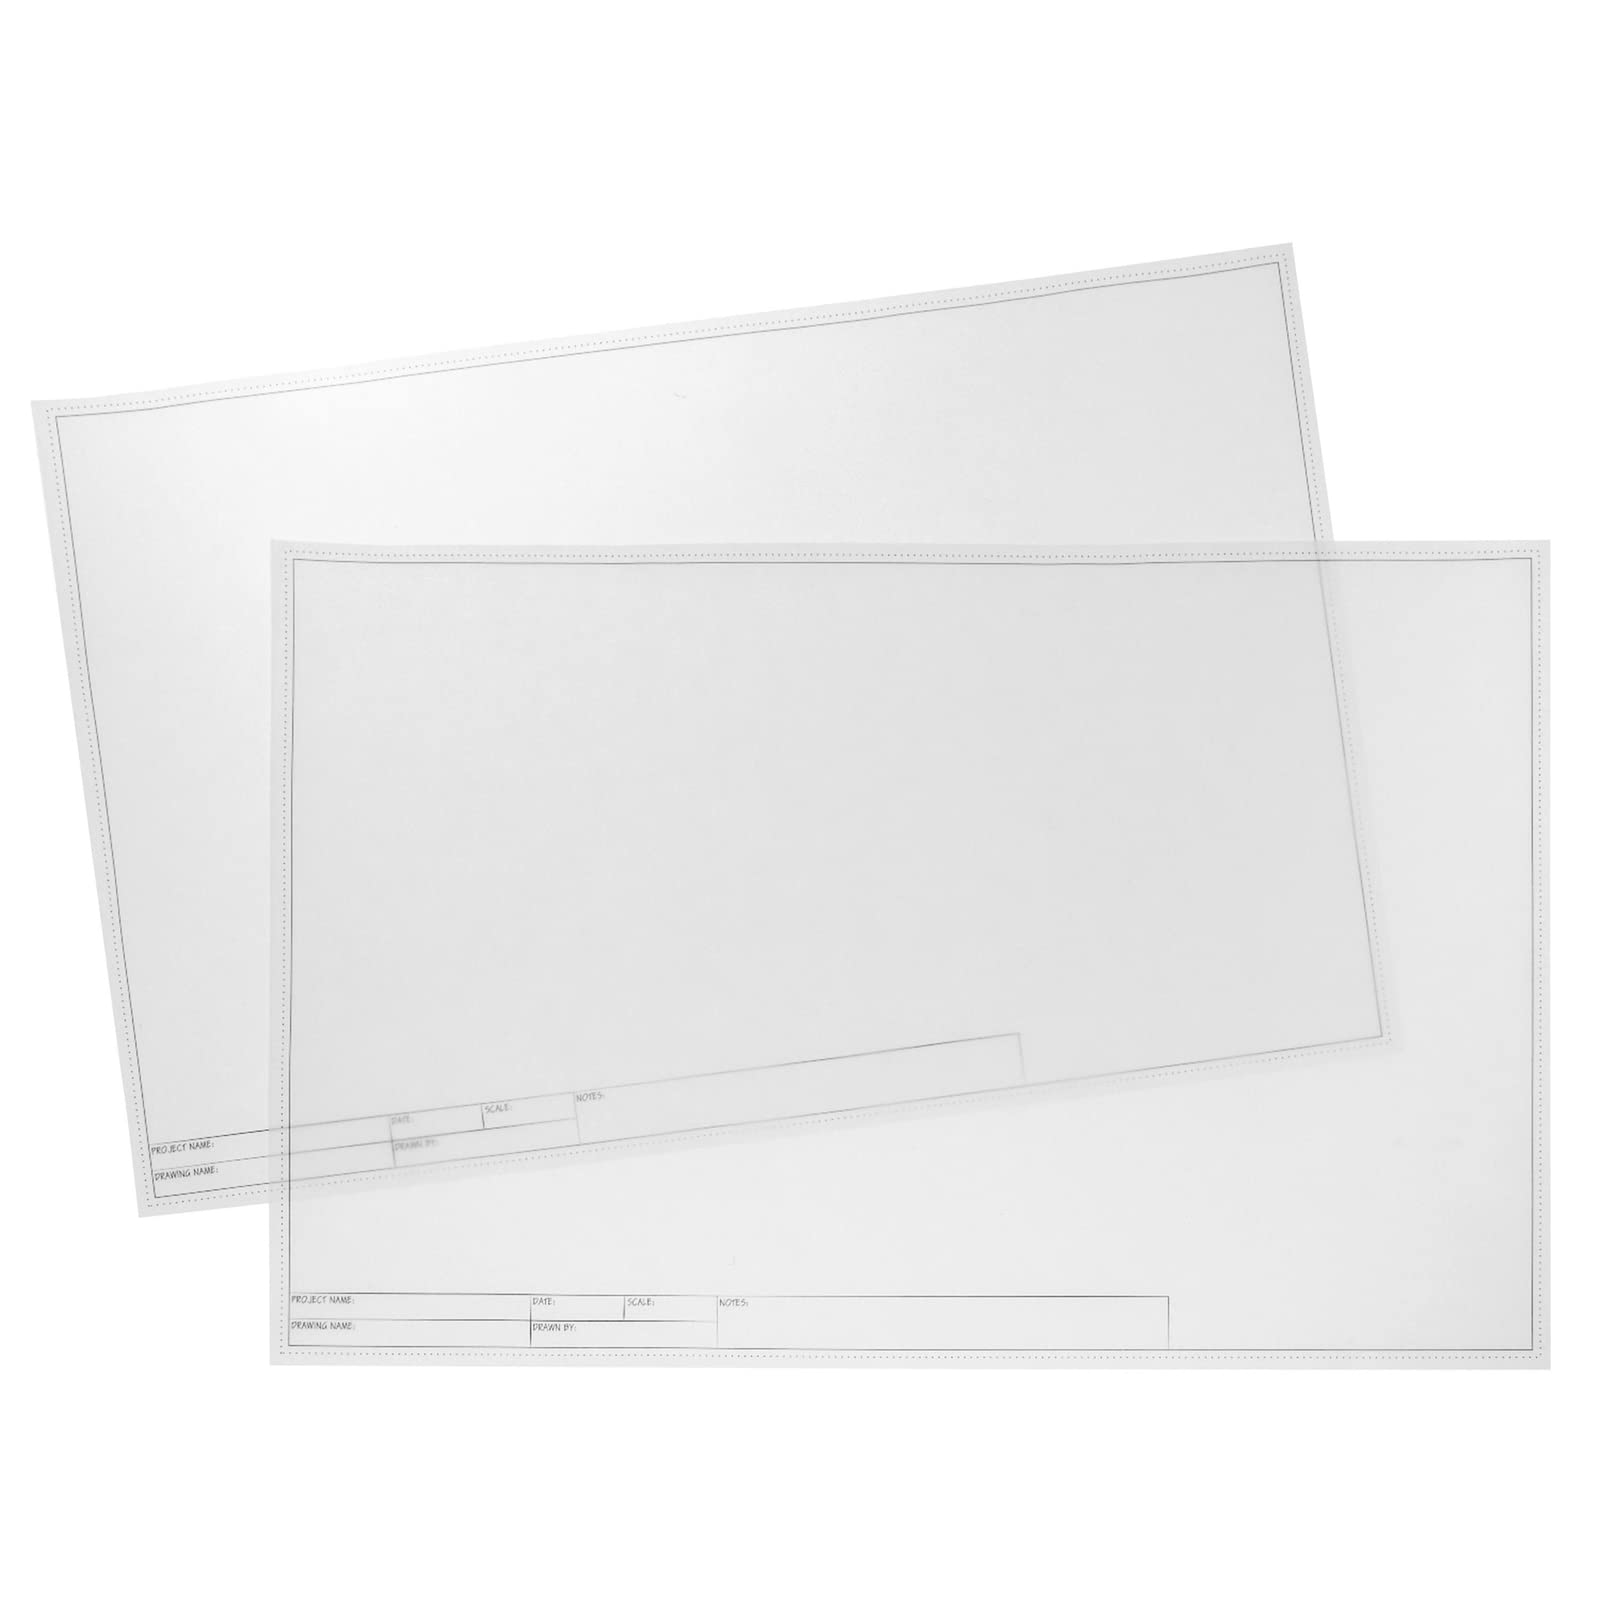 Translucent Architectural Vellum Paper Drafting Sheets 11x17 with Engineer  Title Block (20 Pieces)